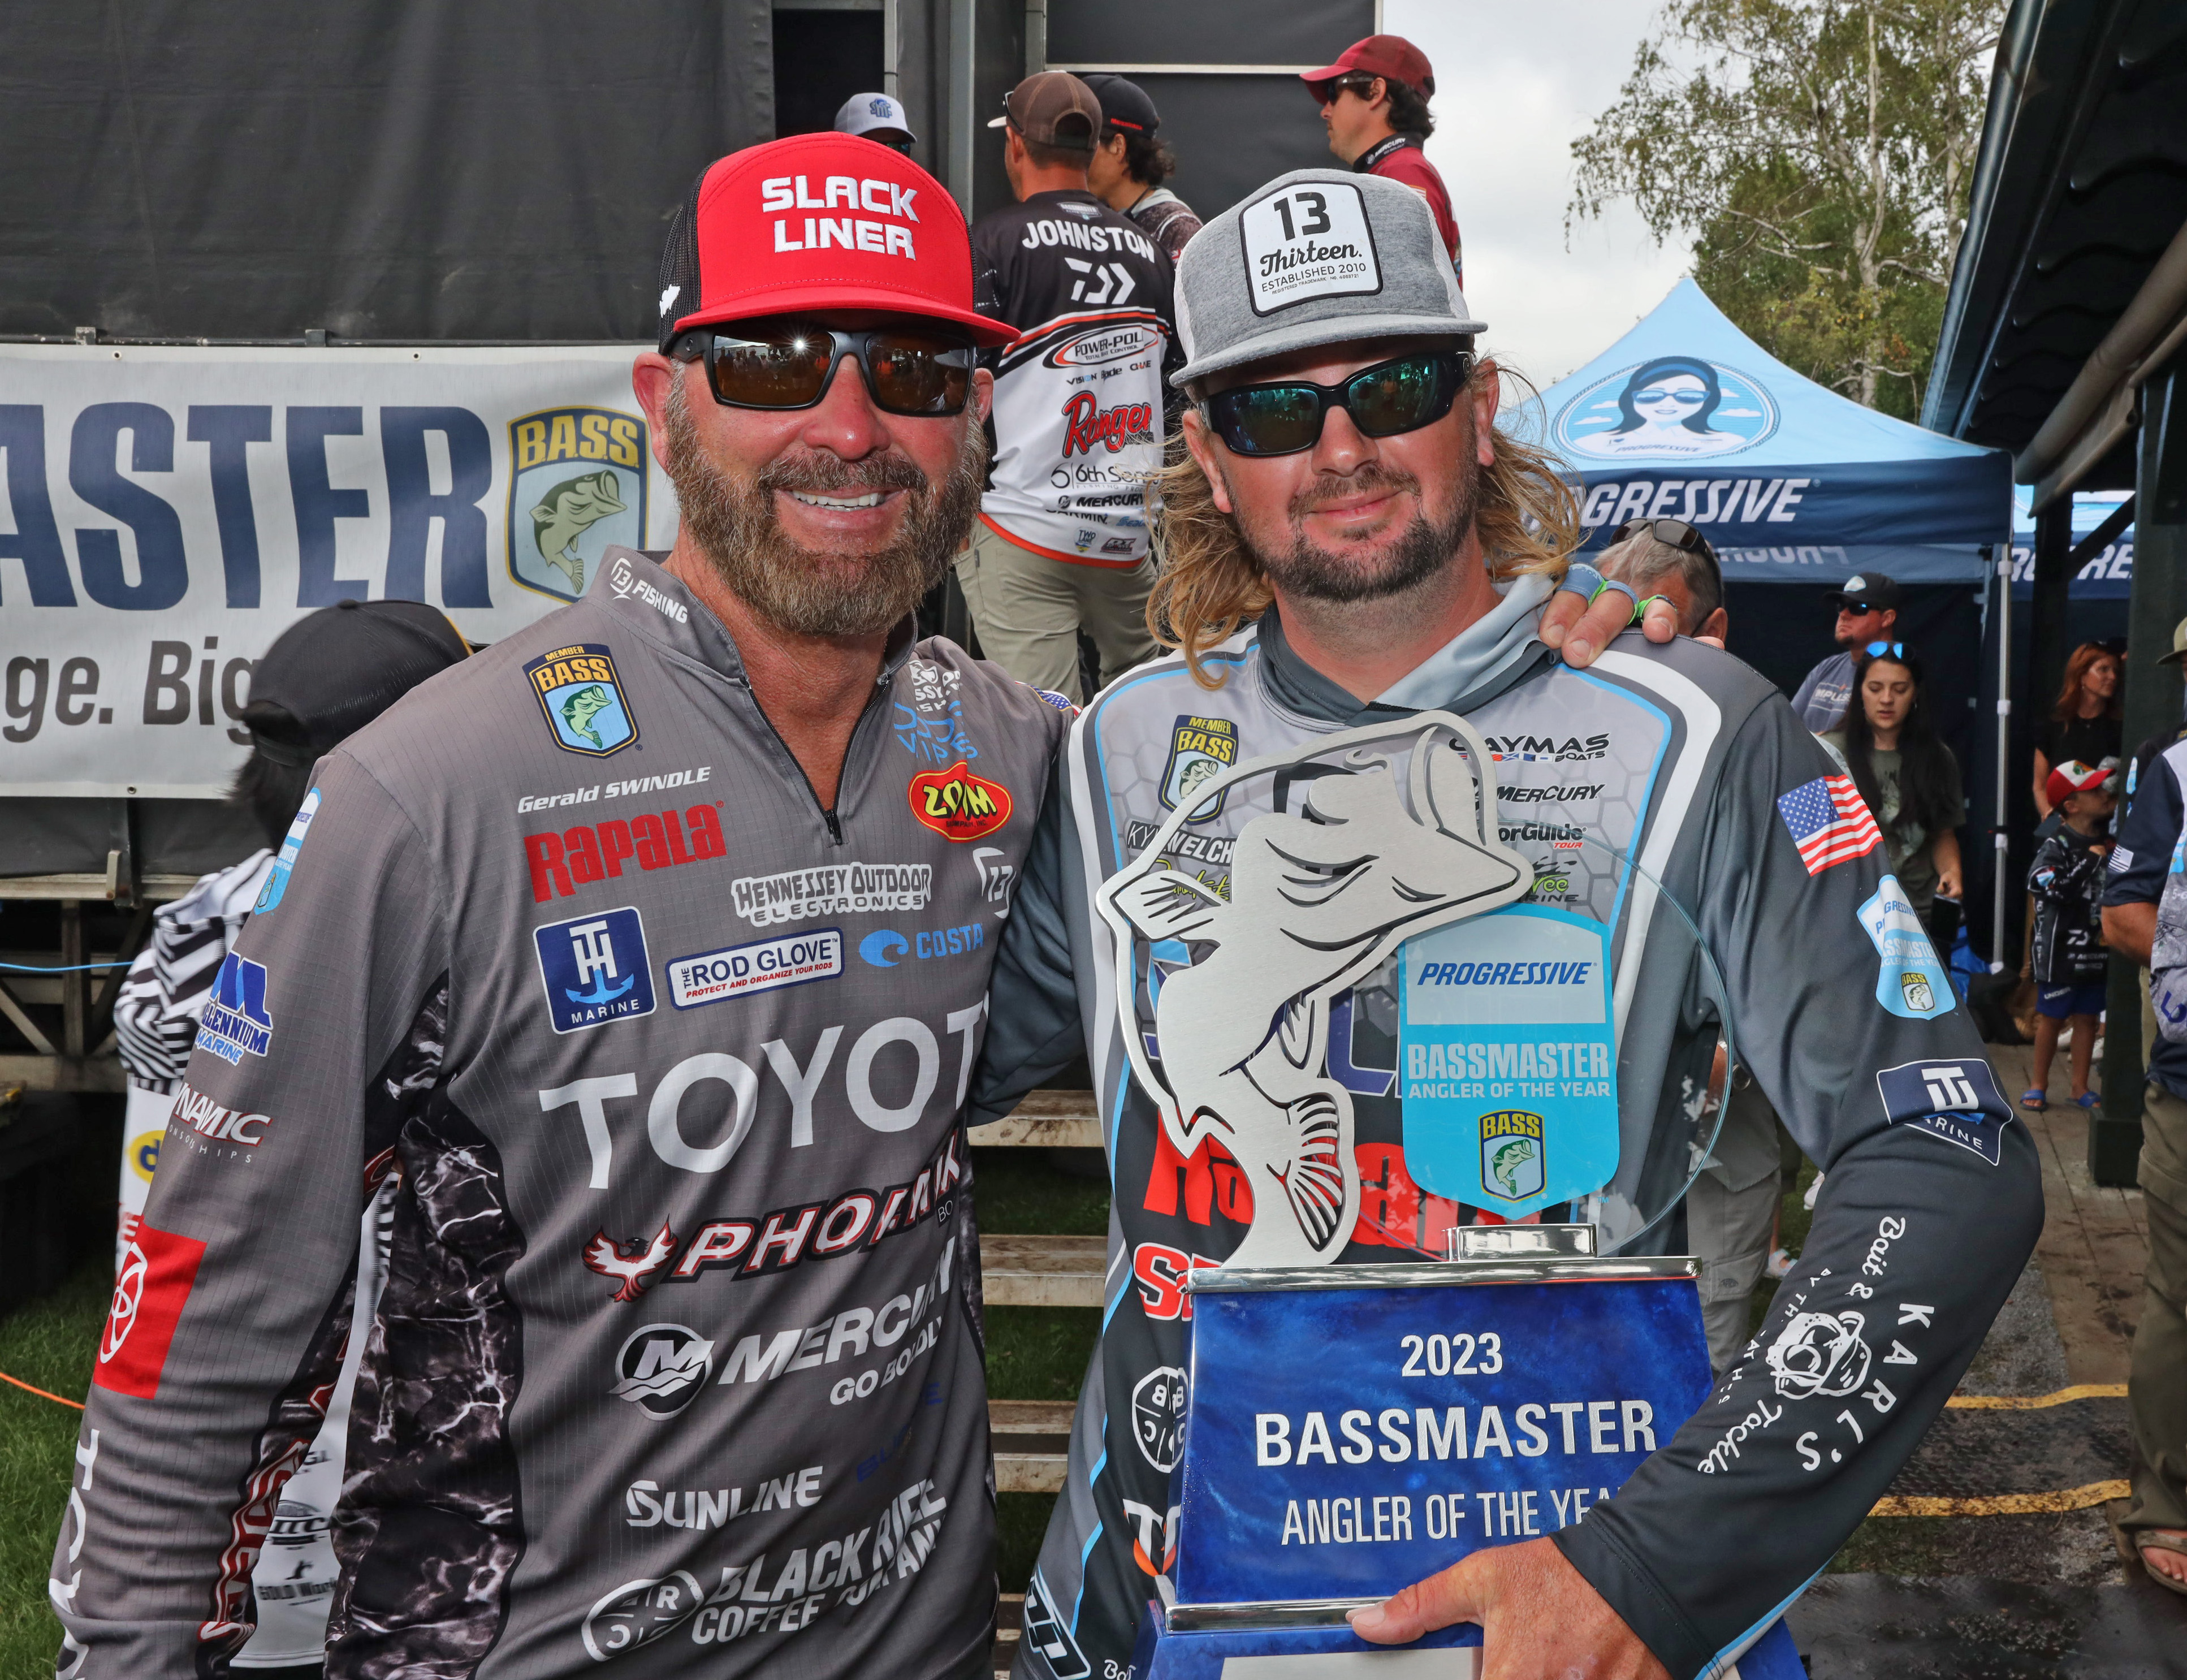 Swindle predicted Welcher's AOY in February - Bassmaster